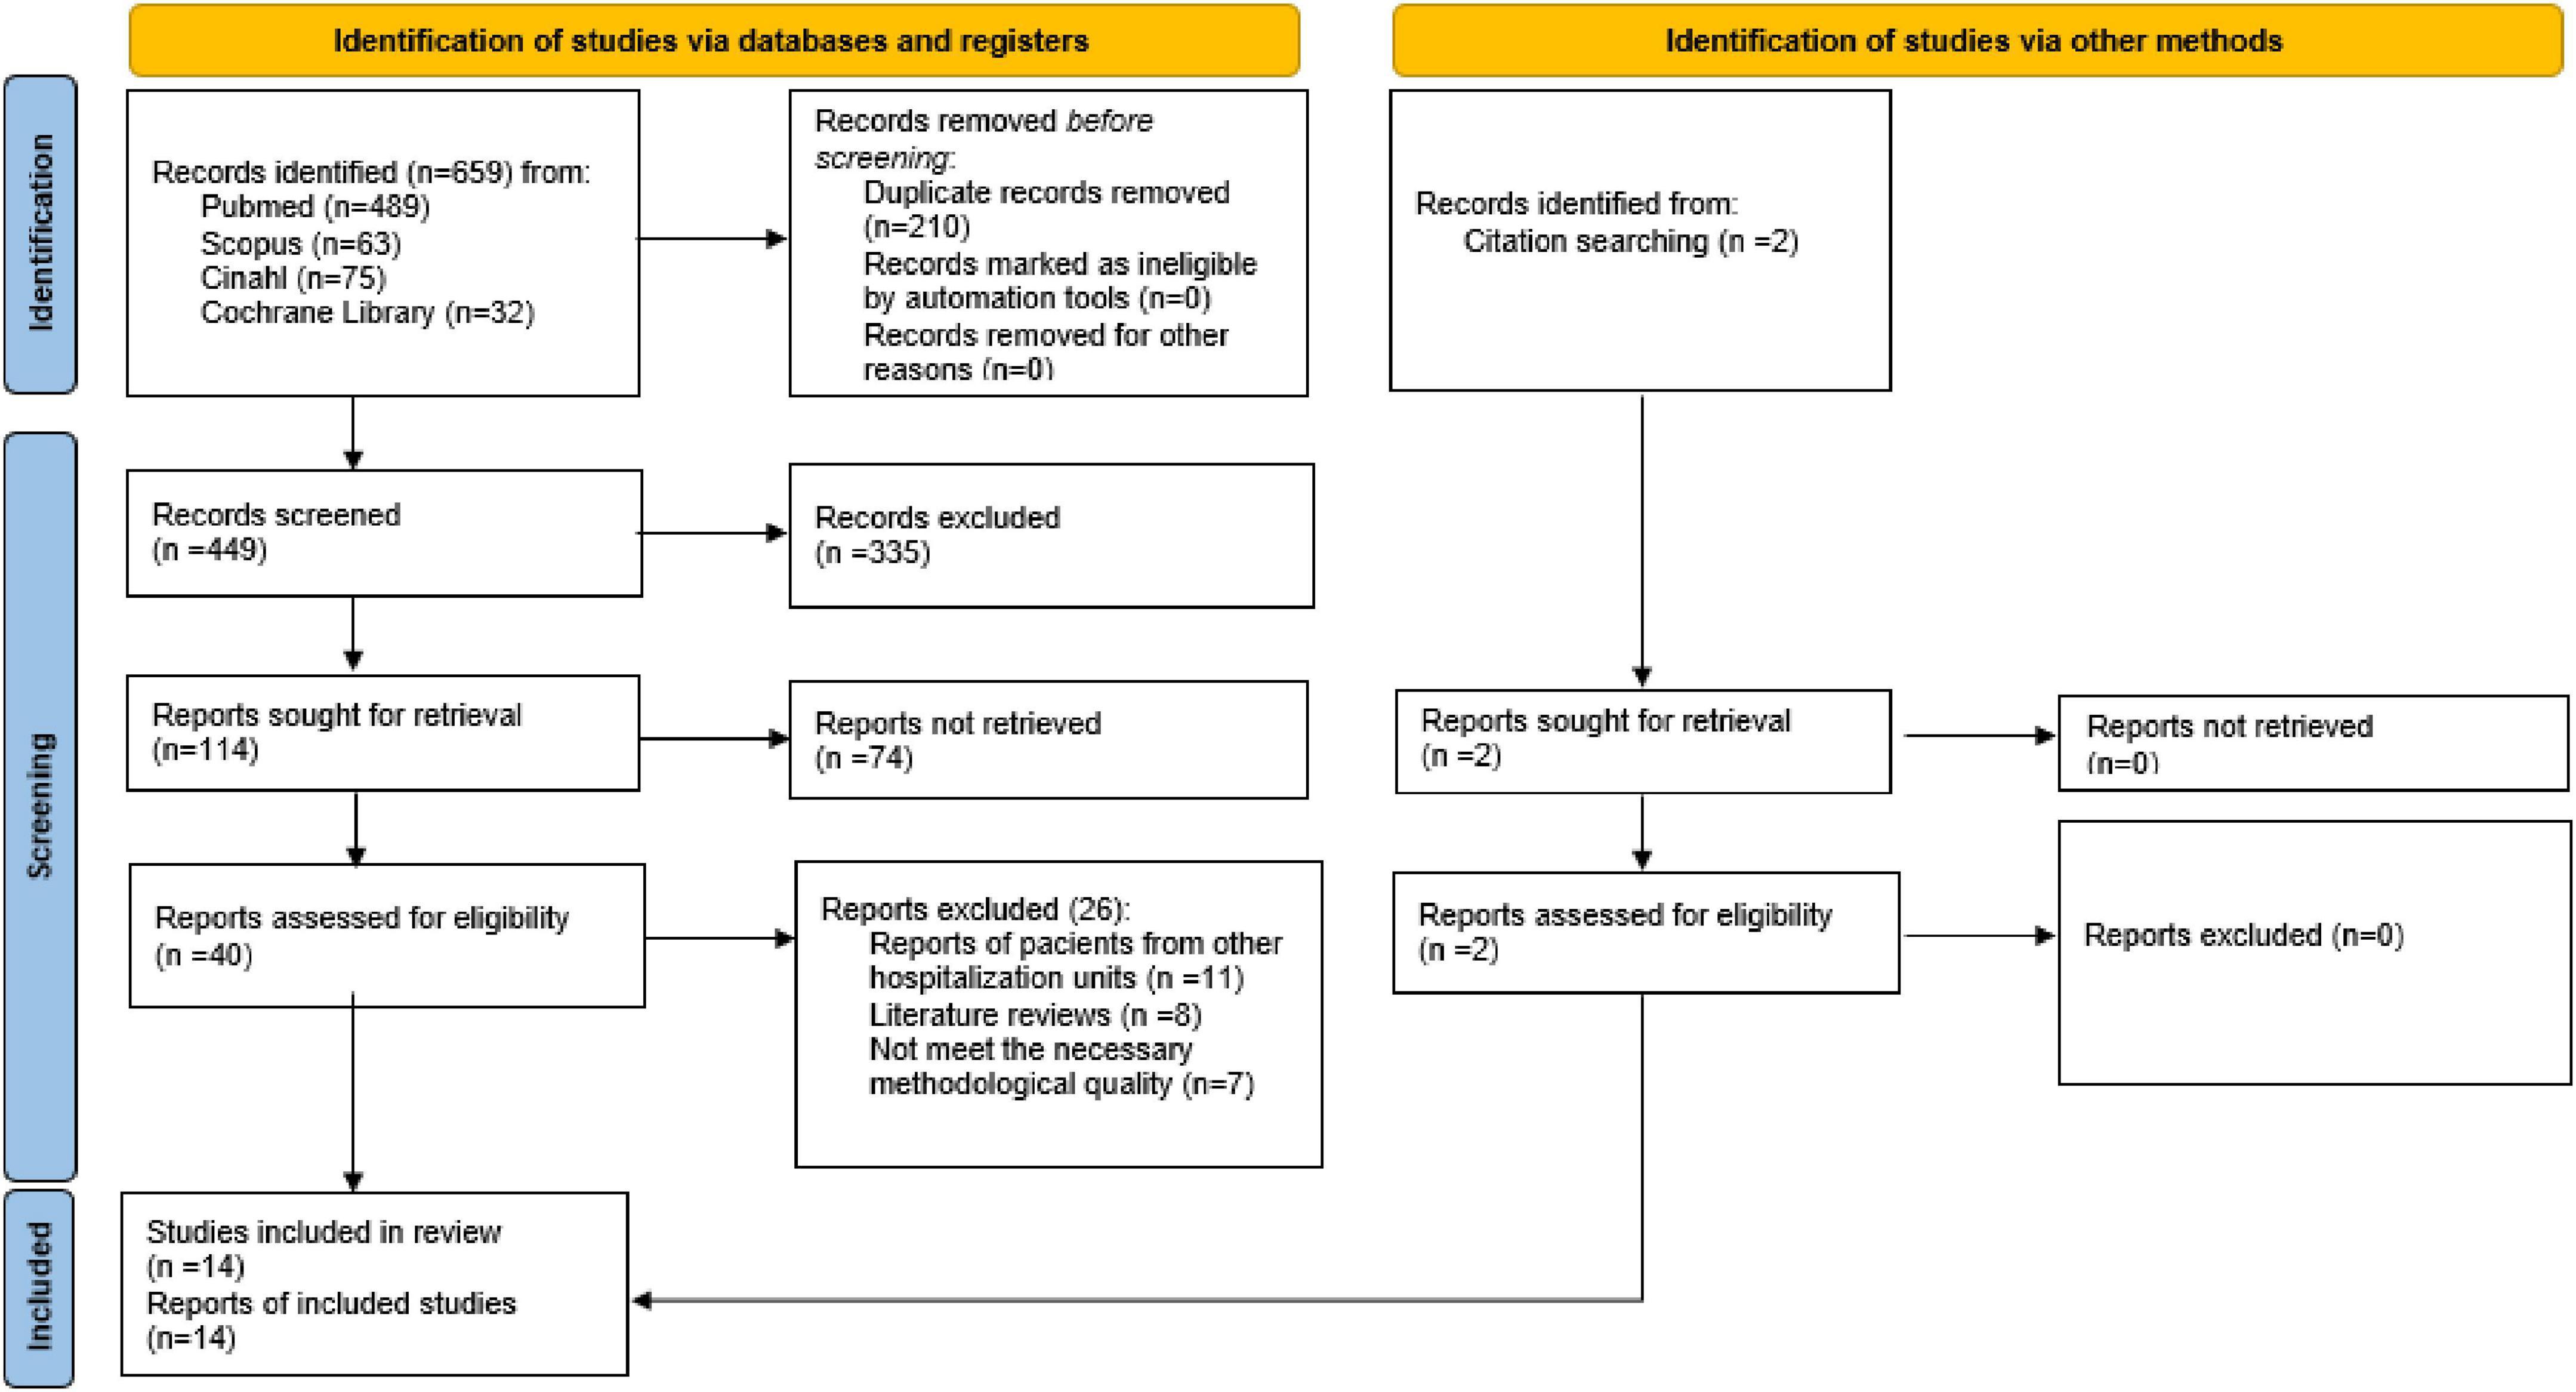 Importance of nutritional assessment tools in the critically ill patient: A systematic review